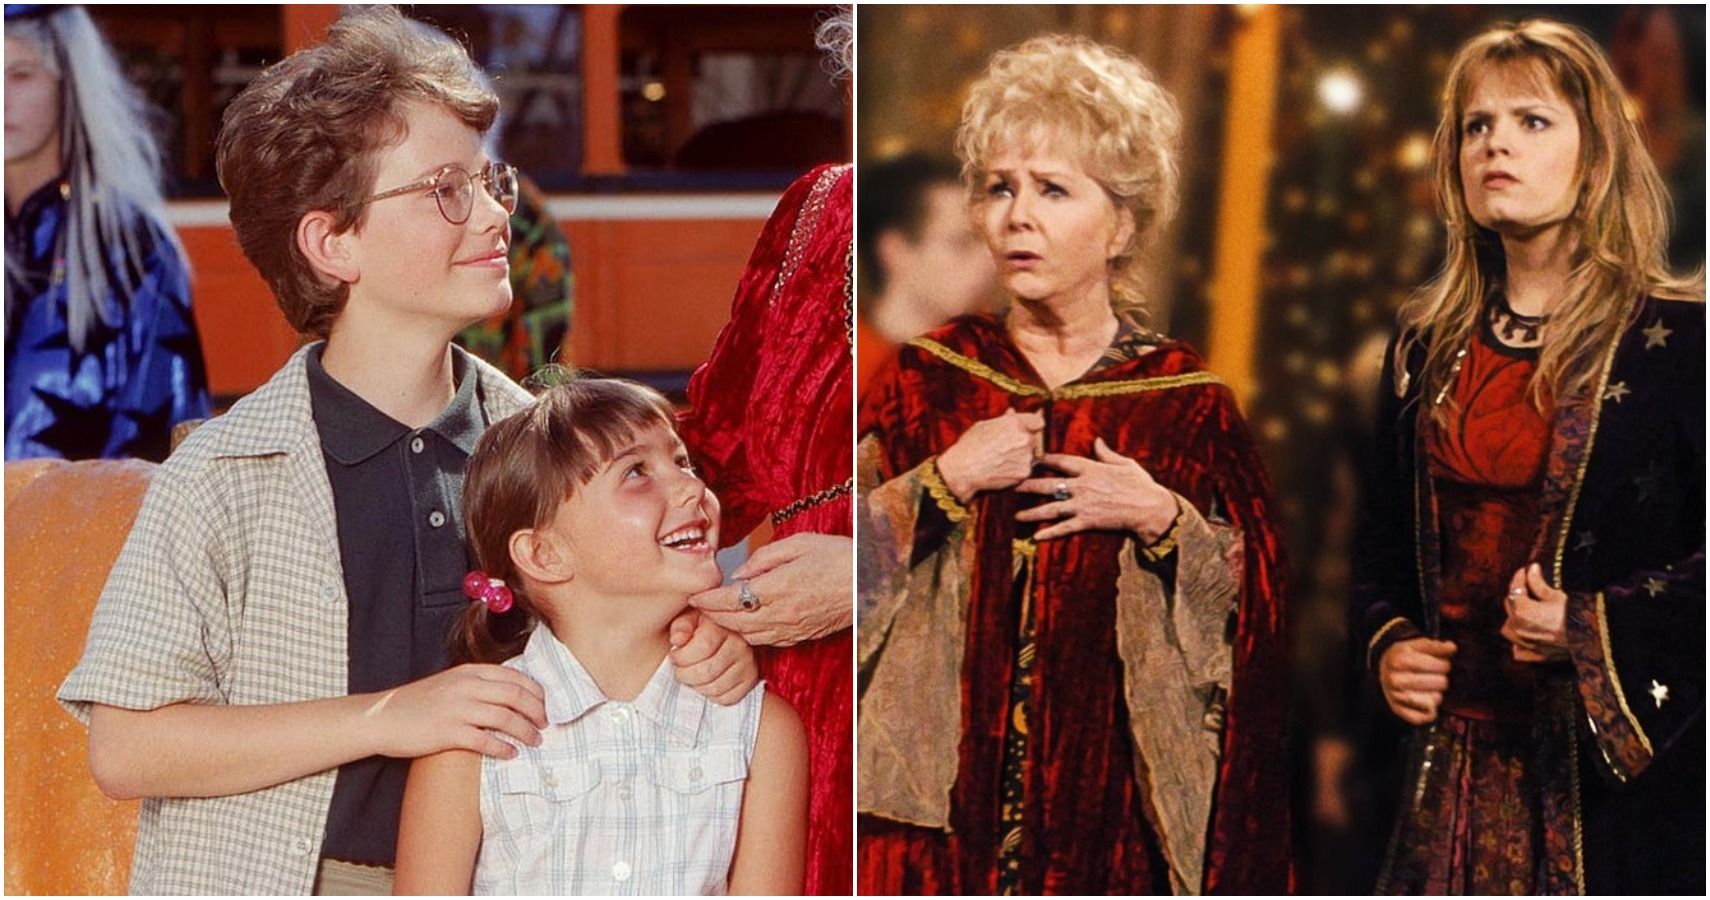 10 Things That Make No Sense About The Halloweentown Franchise